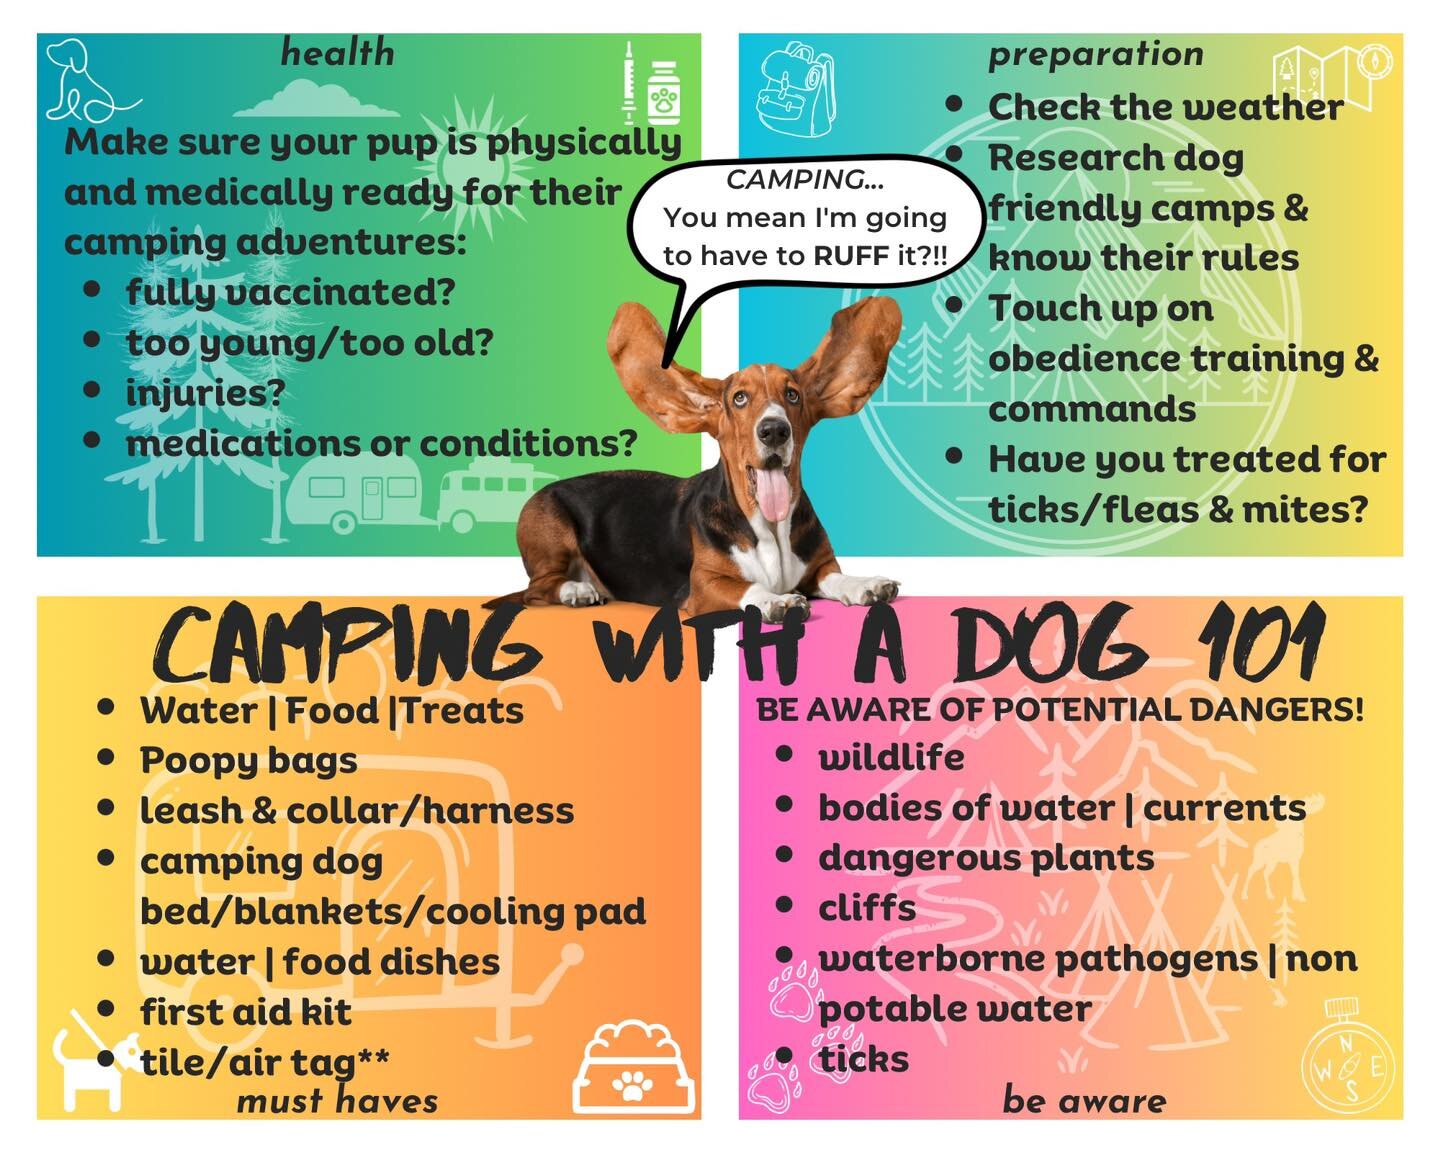 May long weekend is upon us - are you and your pup ready? 

CAMPING WITH DOGS 101 - from WBARC

Did you know: Between TICKS and BLACK BEARS believe it or not ticks pose a bigger threat to dogs than bears !!!!!!!!
Bears are afraid of dogs for multiple